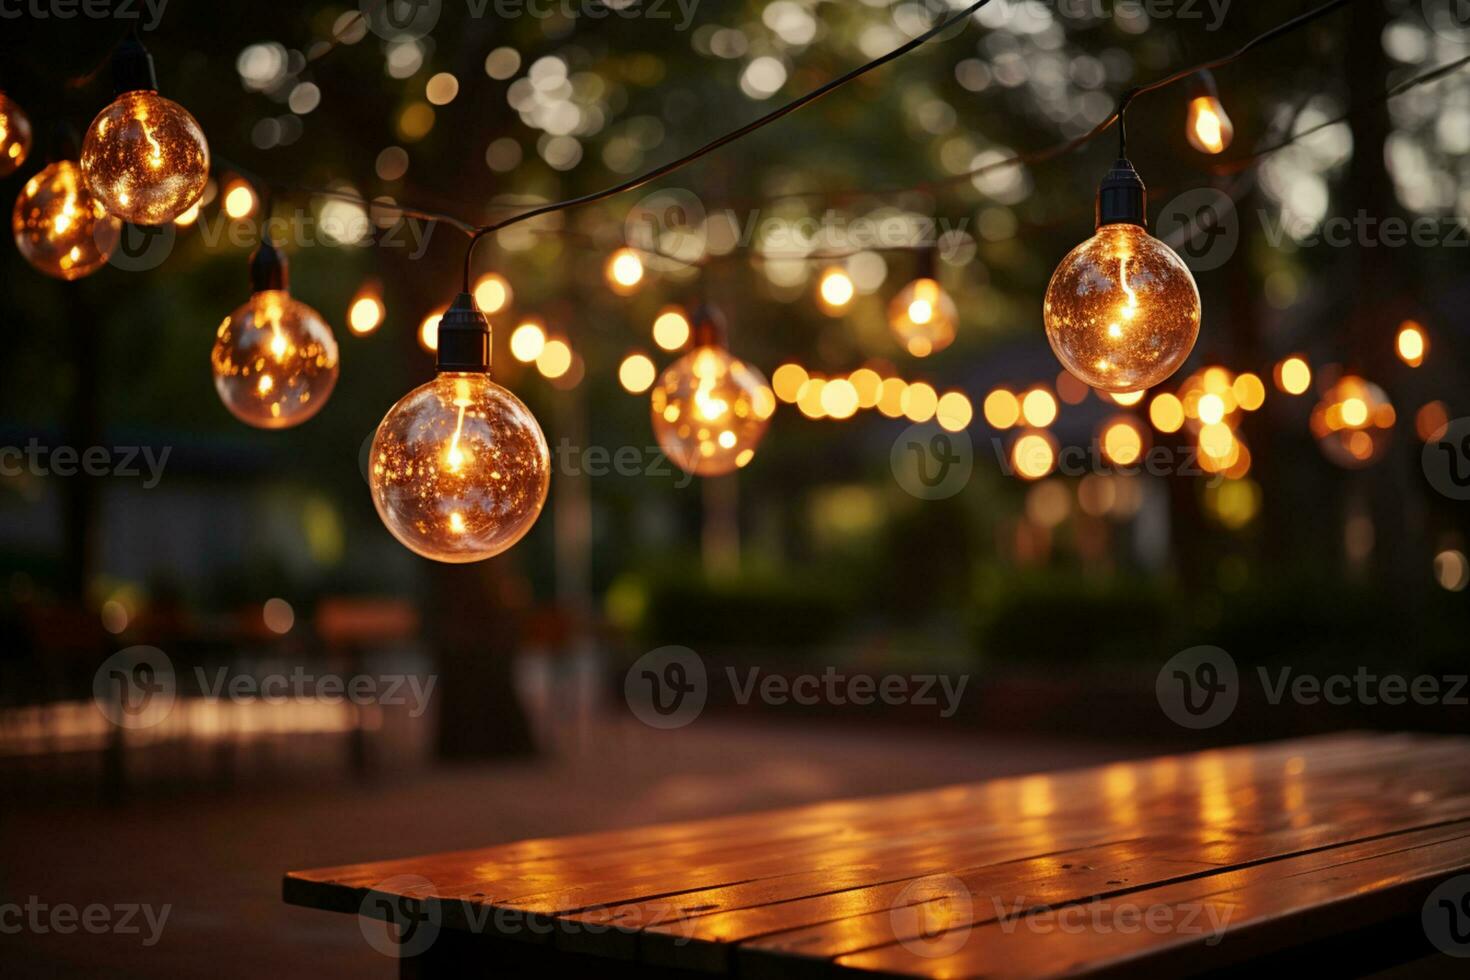 String lights hanging above a wooden table photo - Fairy lights